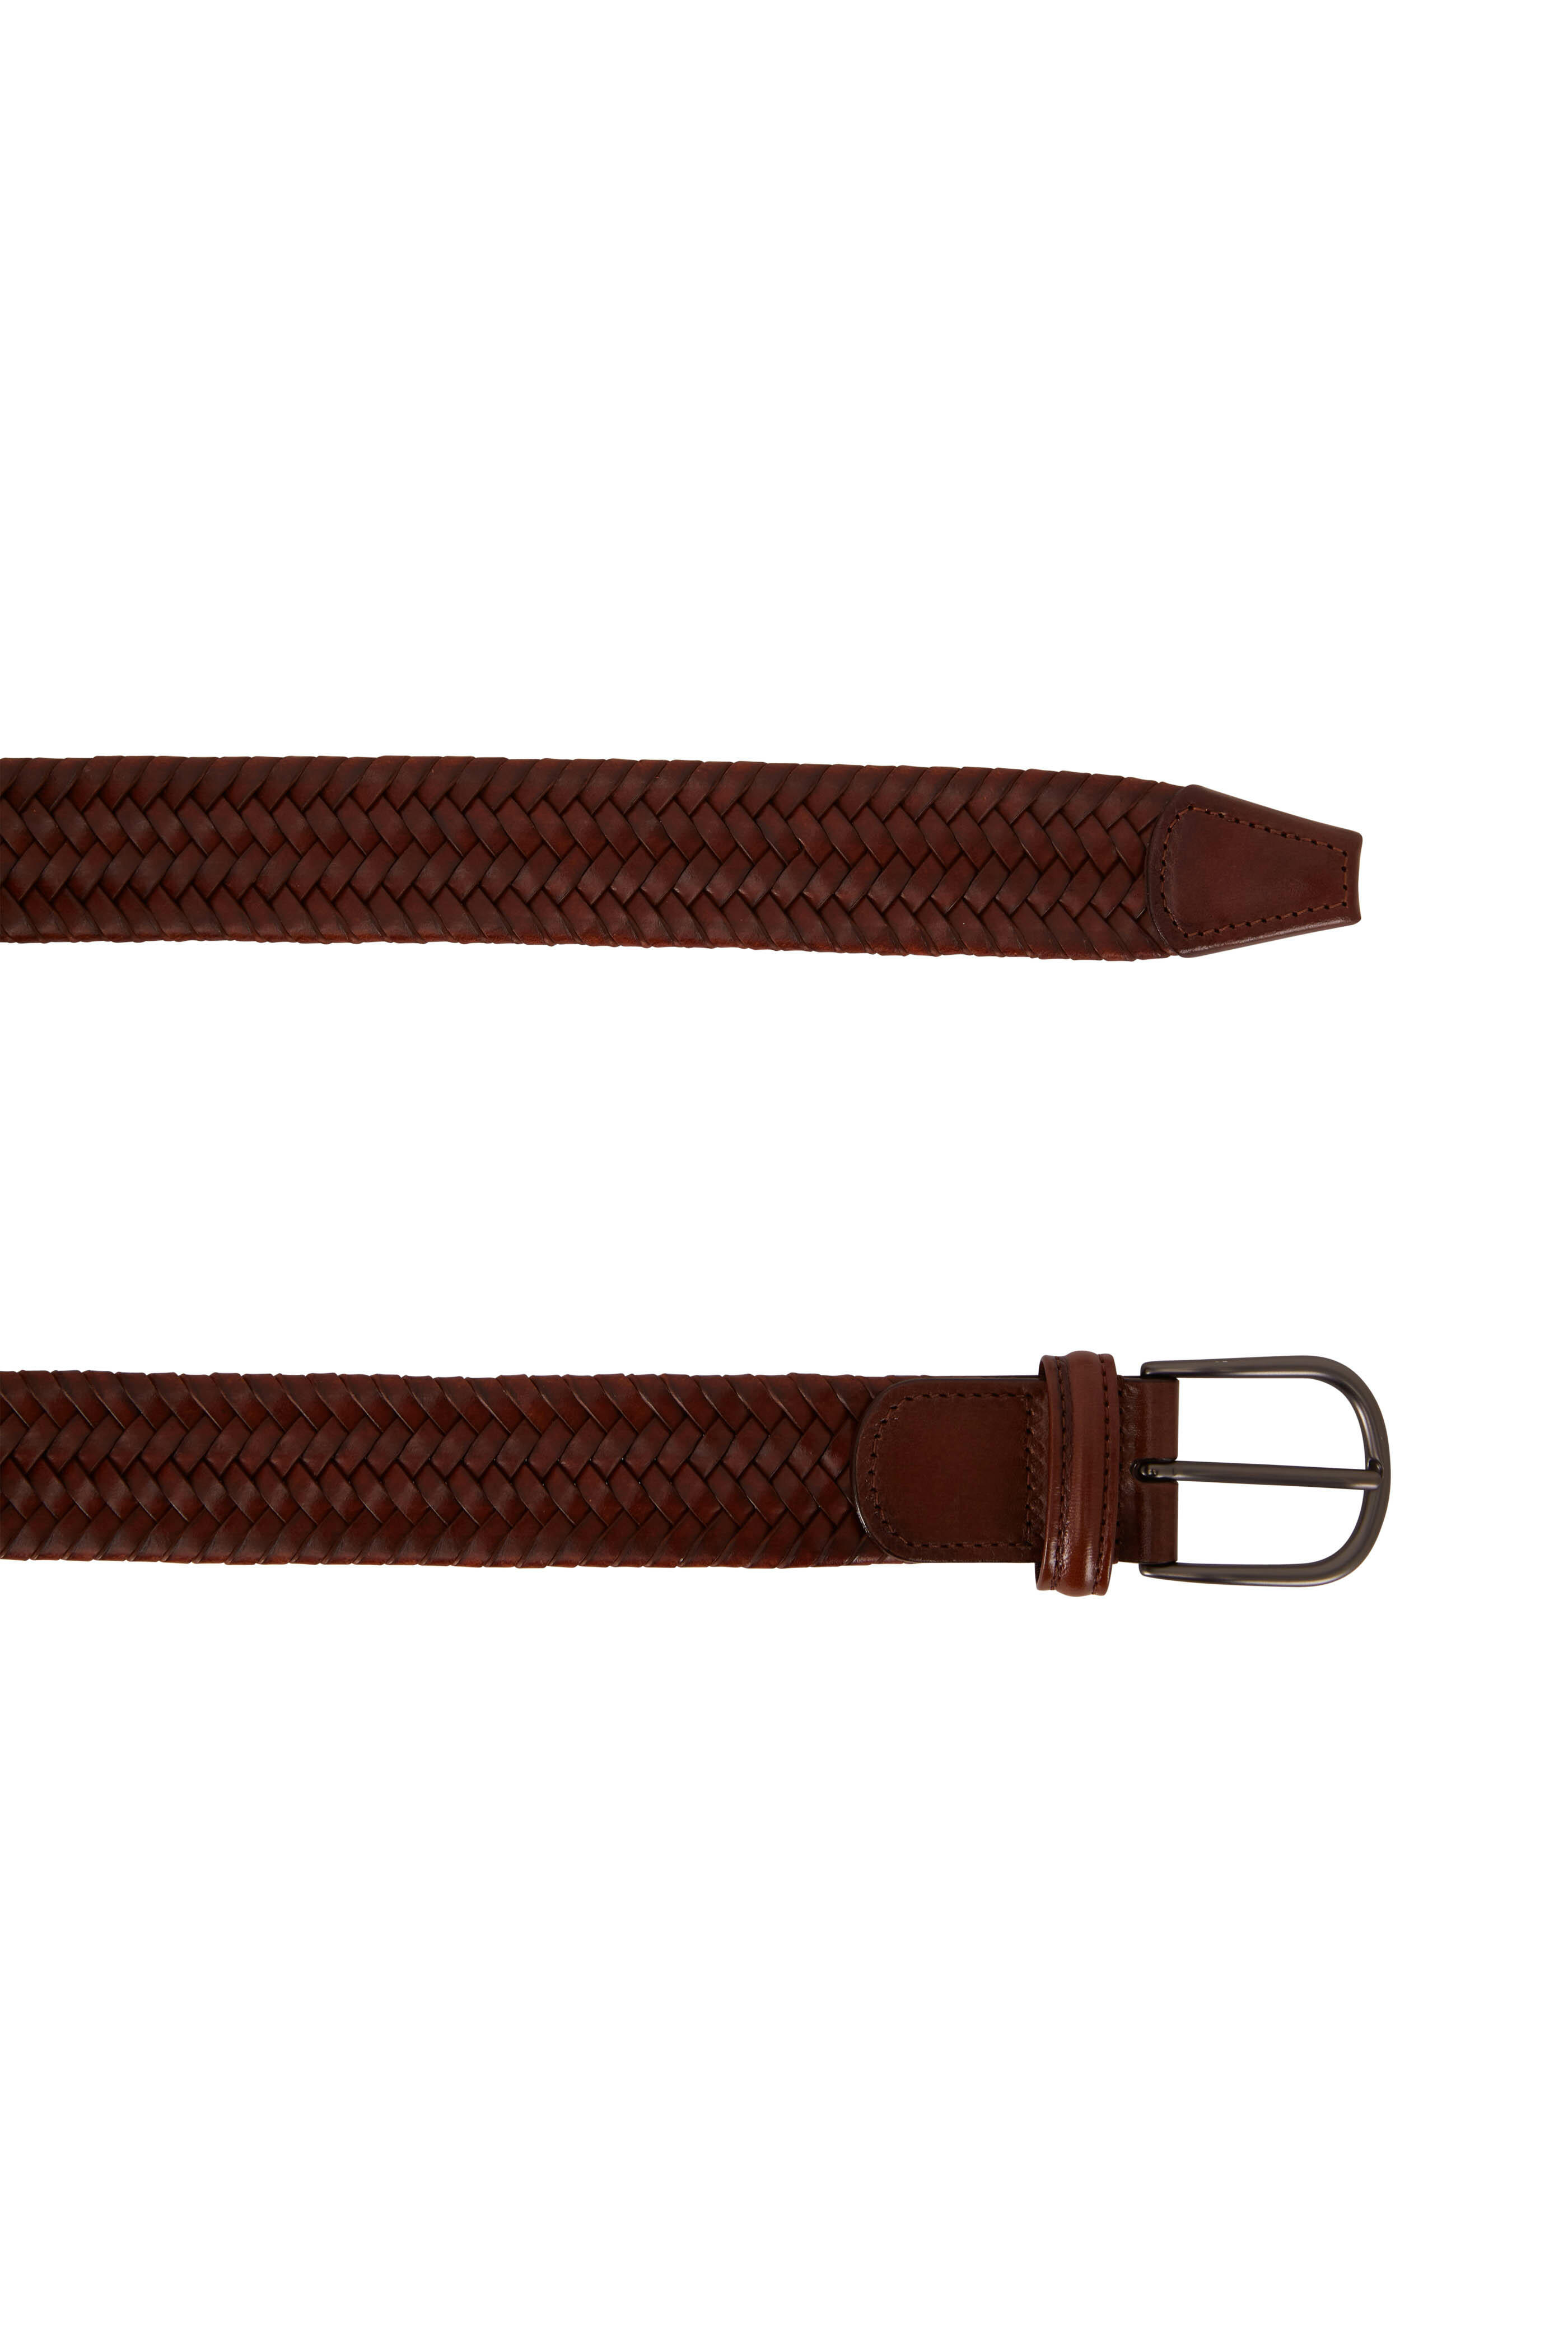 Anderson's - Braided Belts - Leather SoulLeather Soul